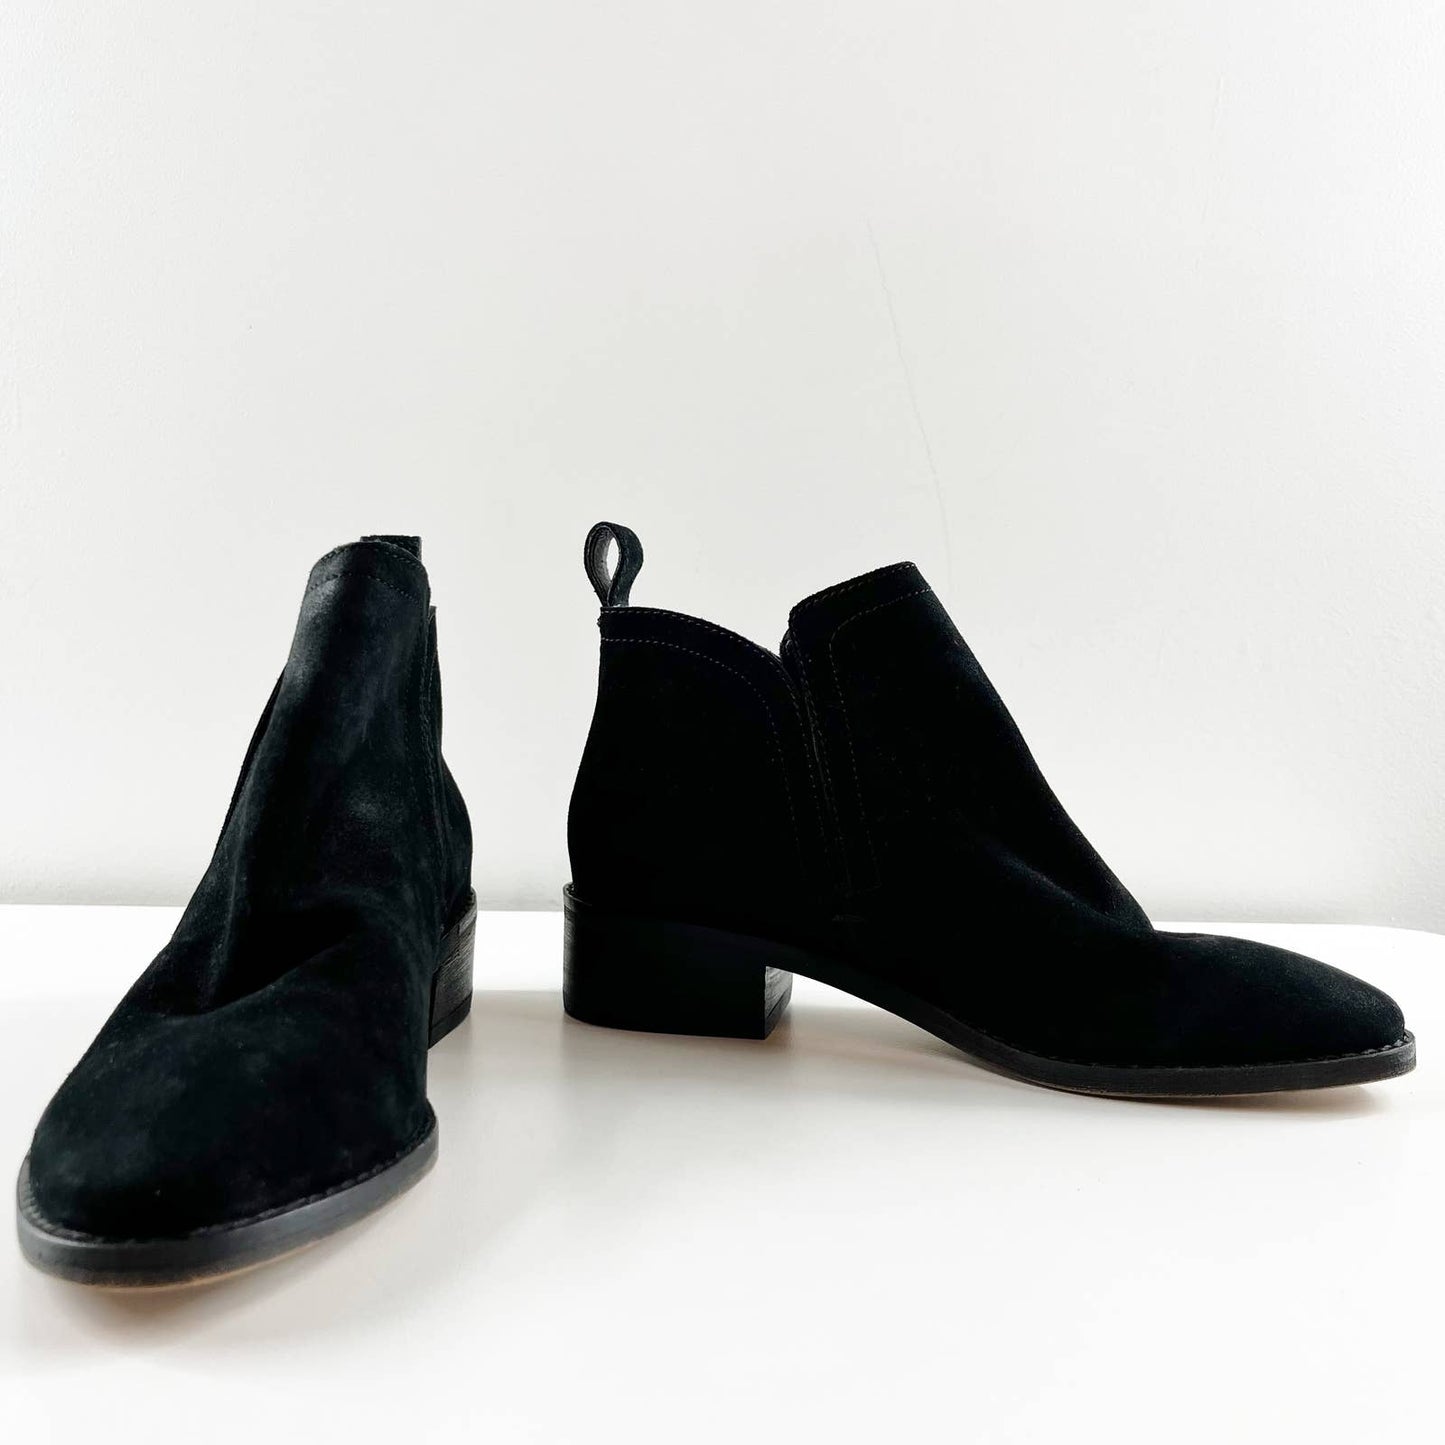 Dolce Vita Tessey Suede Ankle Boots Booties Black 6